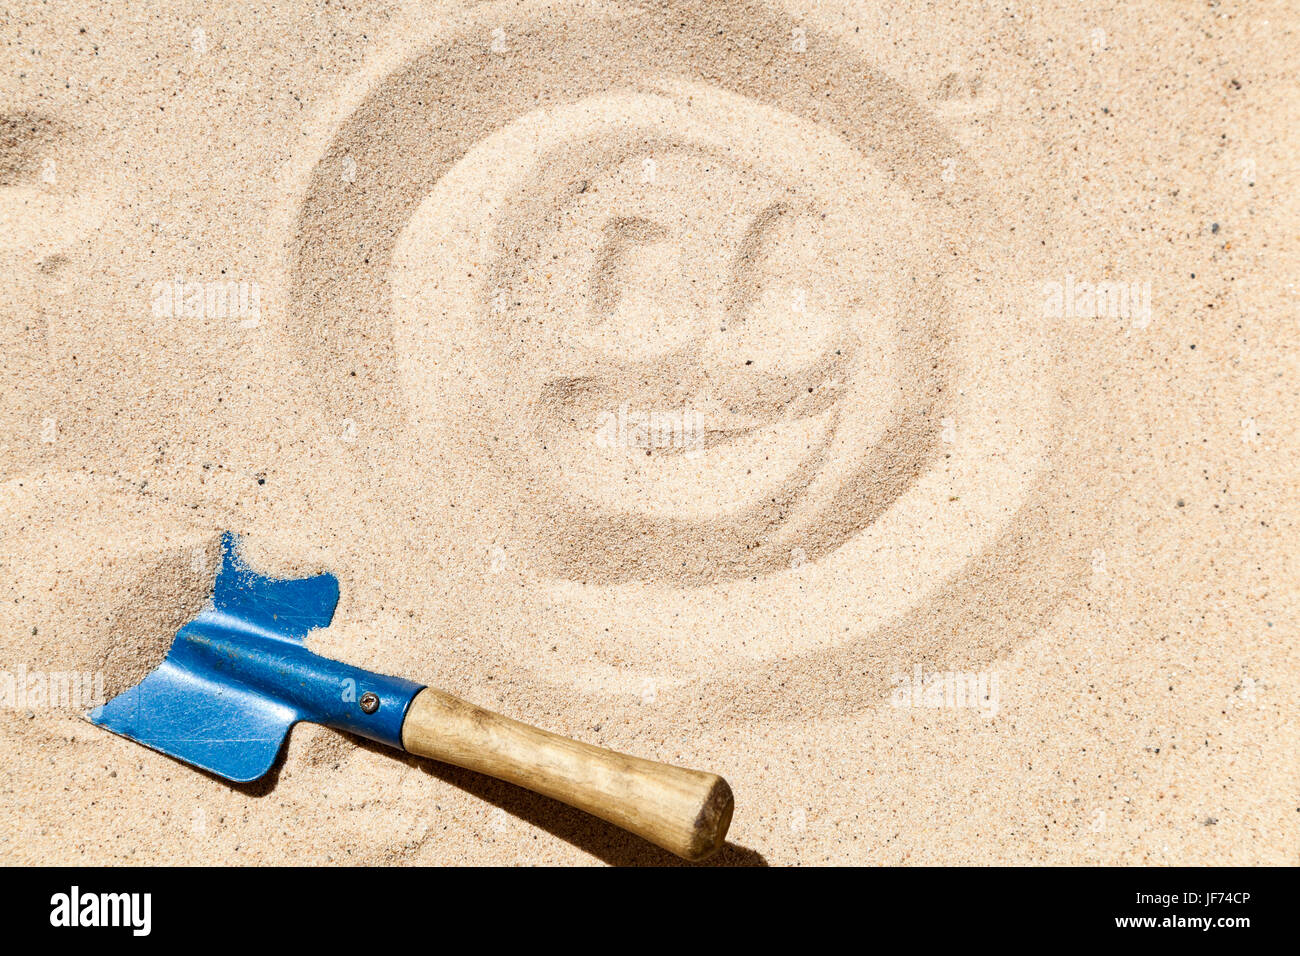 Smiley face drawn on sand and a small blue spade Stock Photo